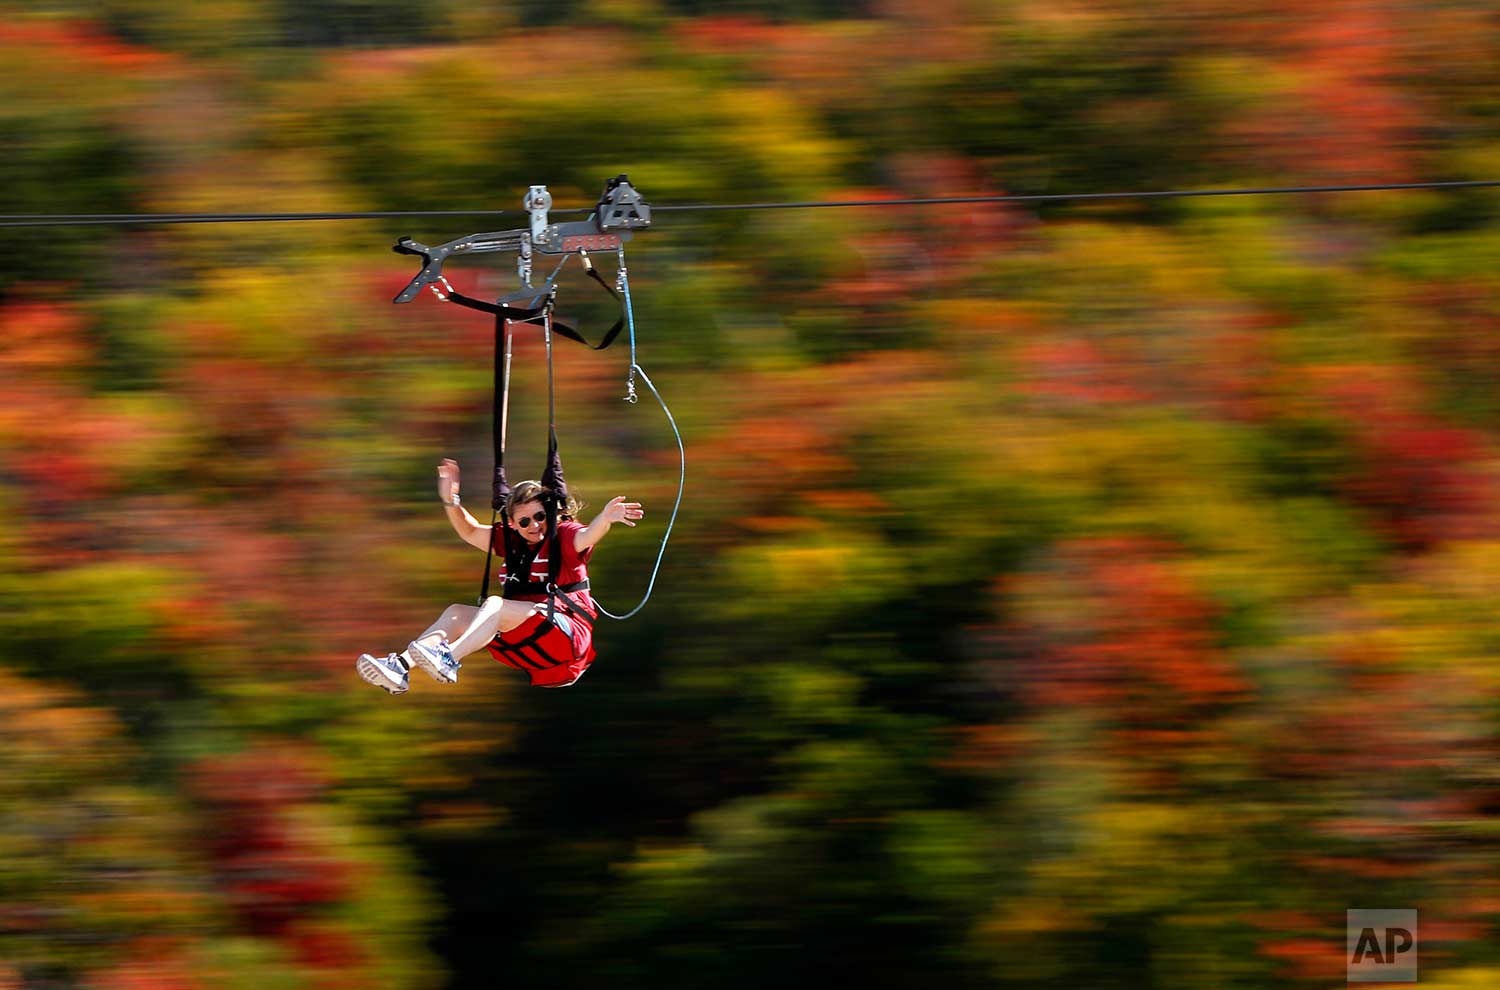  Katie McWalter of Southborough, Mass., sails by the fall foliage while riding the ZipRider at Wildcat Mountain, Saturday, Sept. 23, 2017, in Pinkham Notch, N.H. The first weekend of autumn is unusually warm with temperatures climbing into the upper 